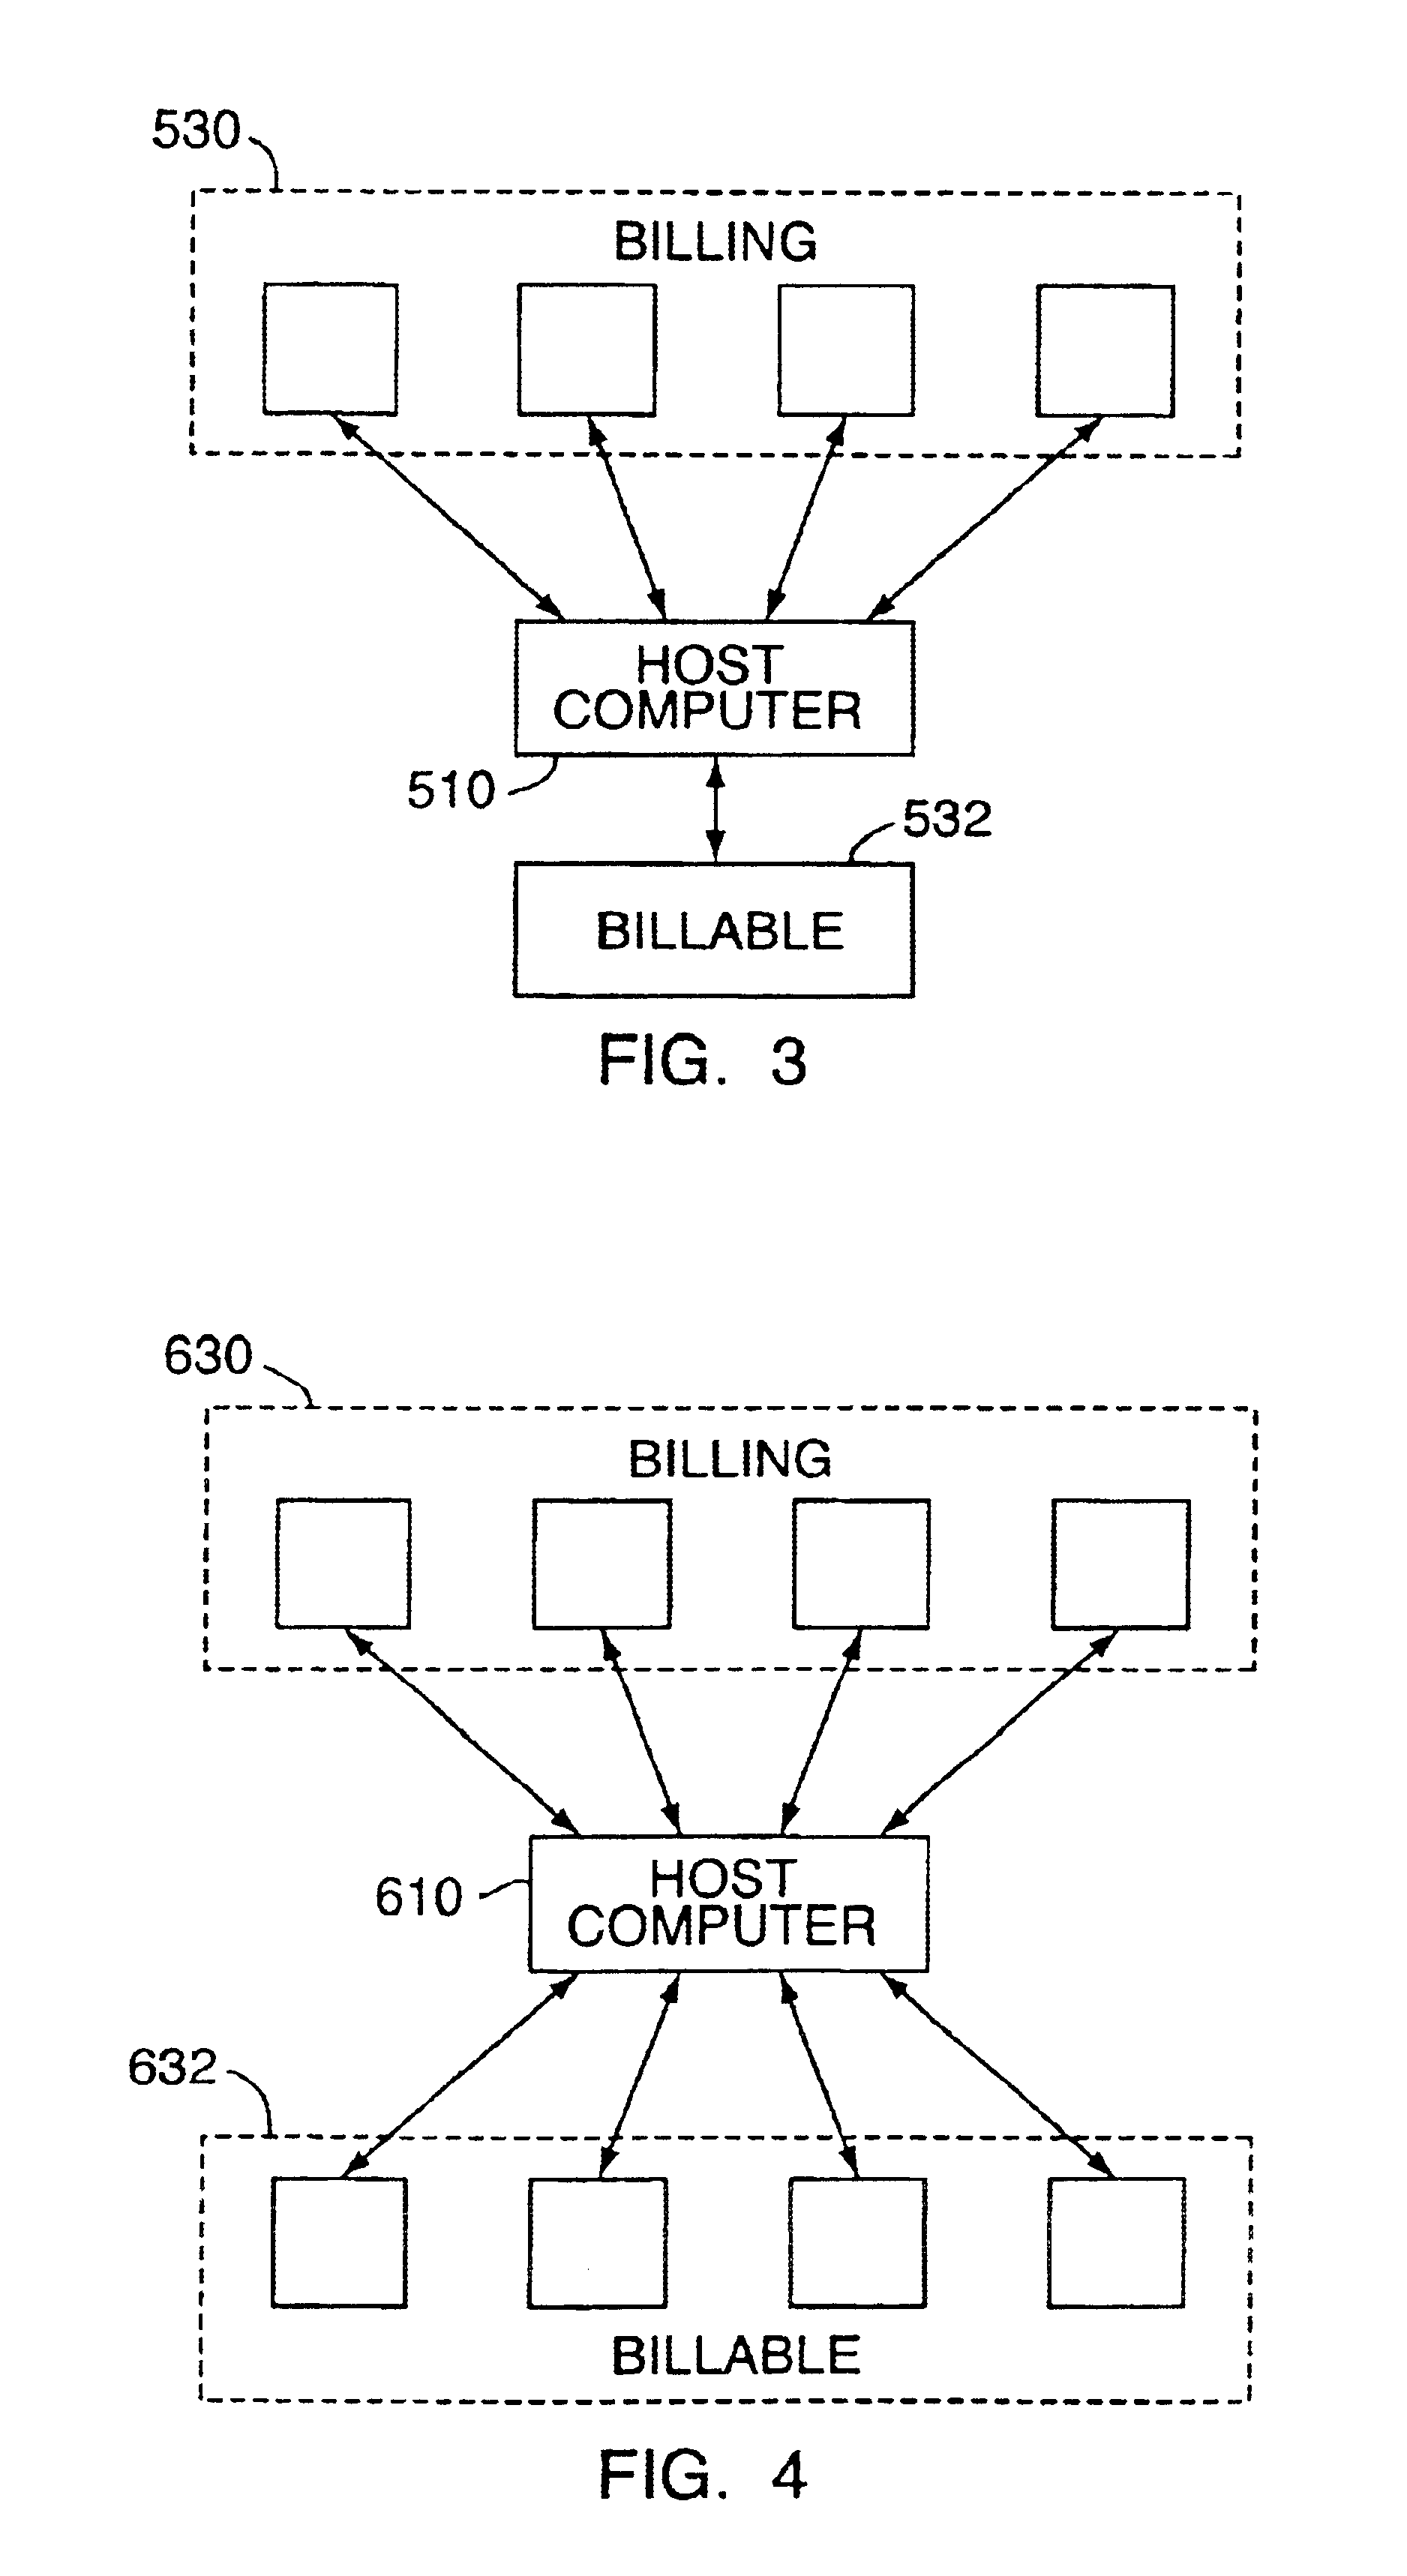 Method for automatic processing of invoices